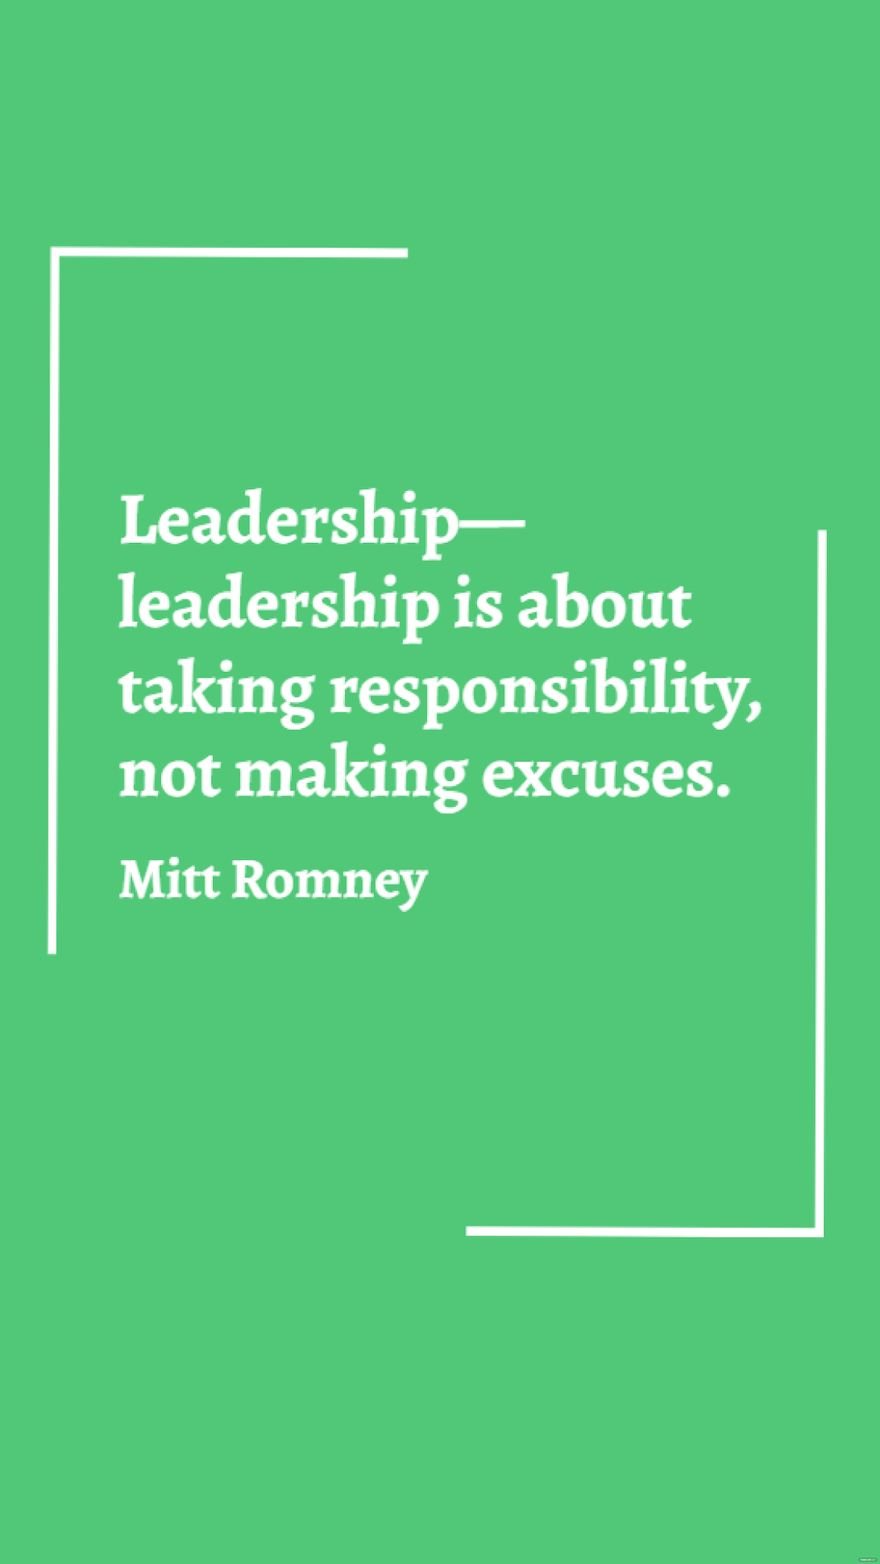 Free Mitt Romney - Leadership - leadership is about taking responsibility, not making excuses.